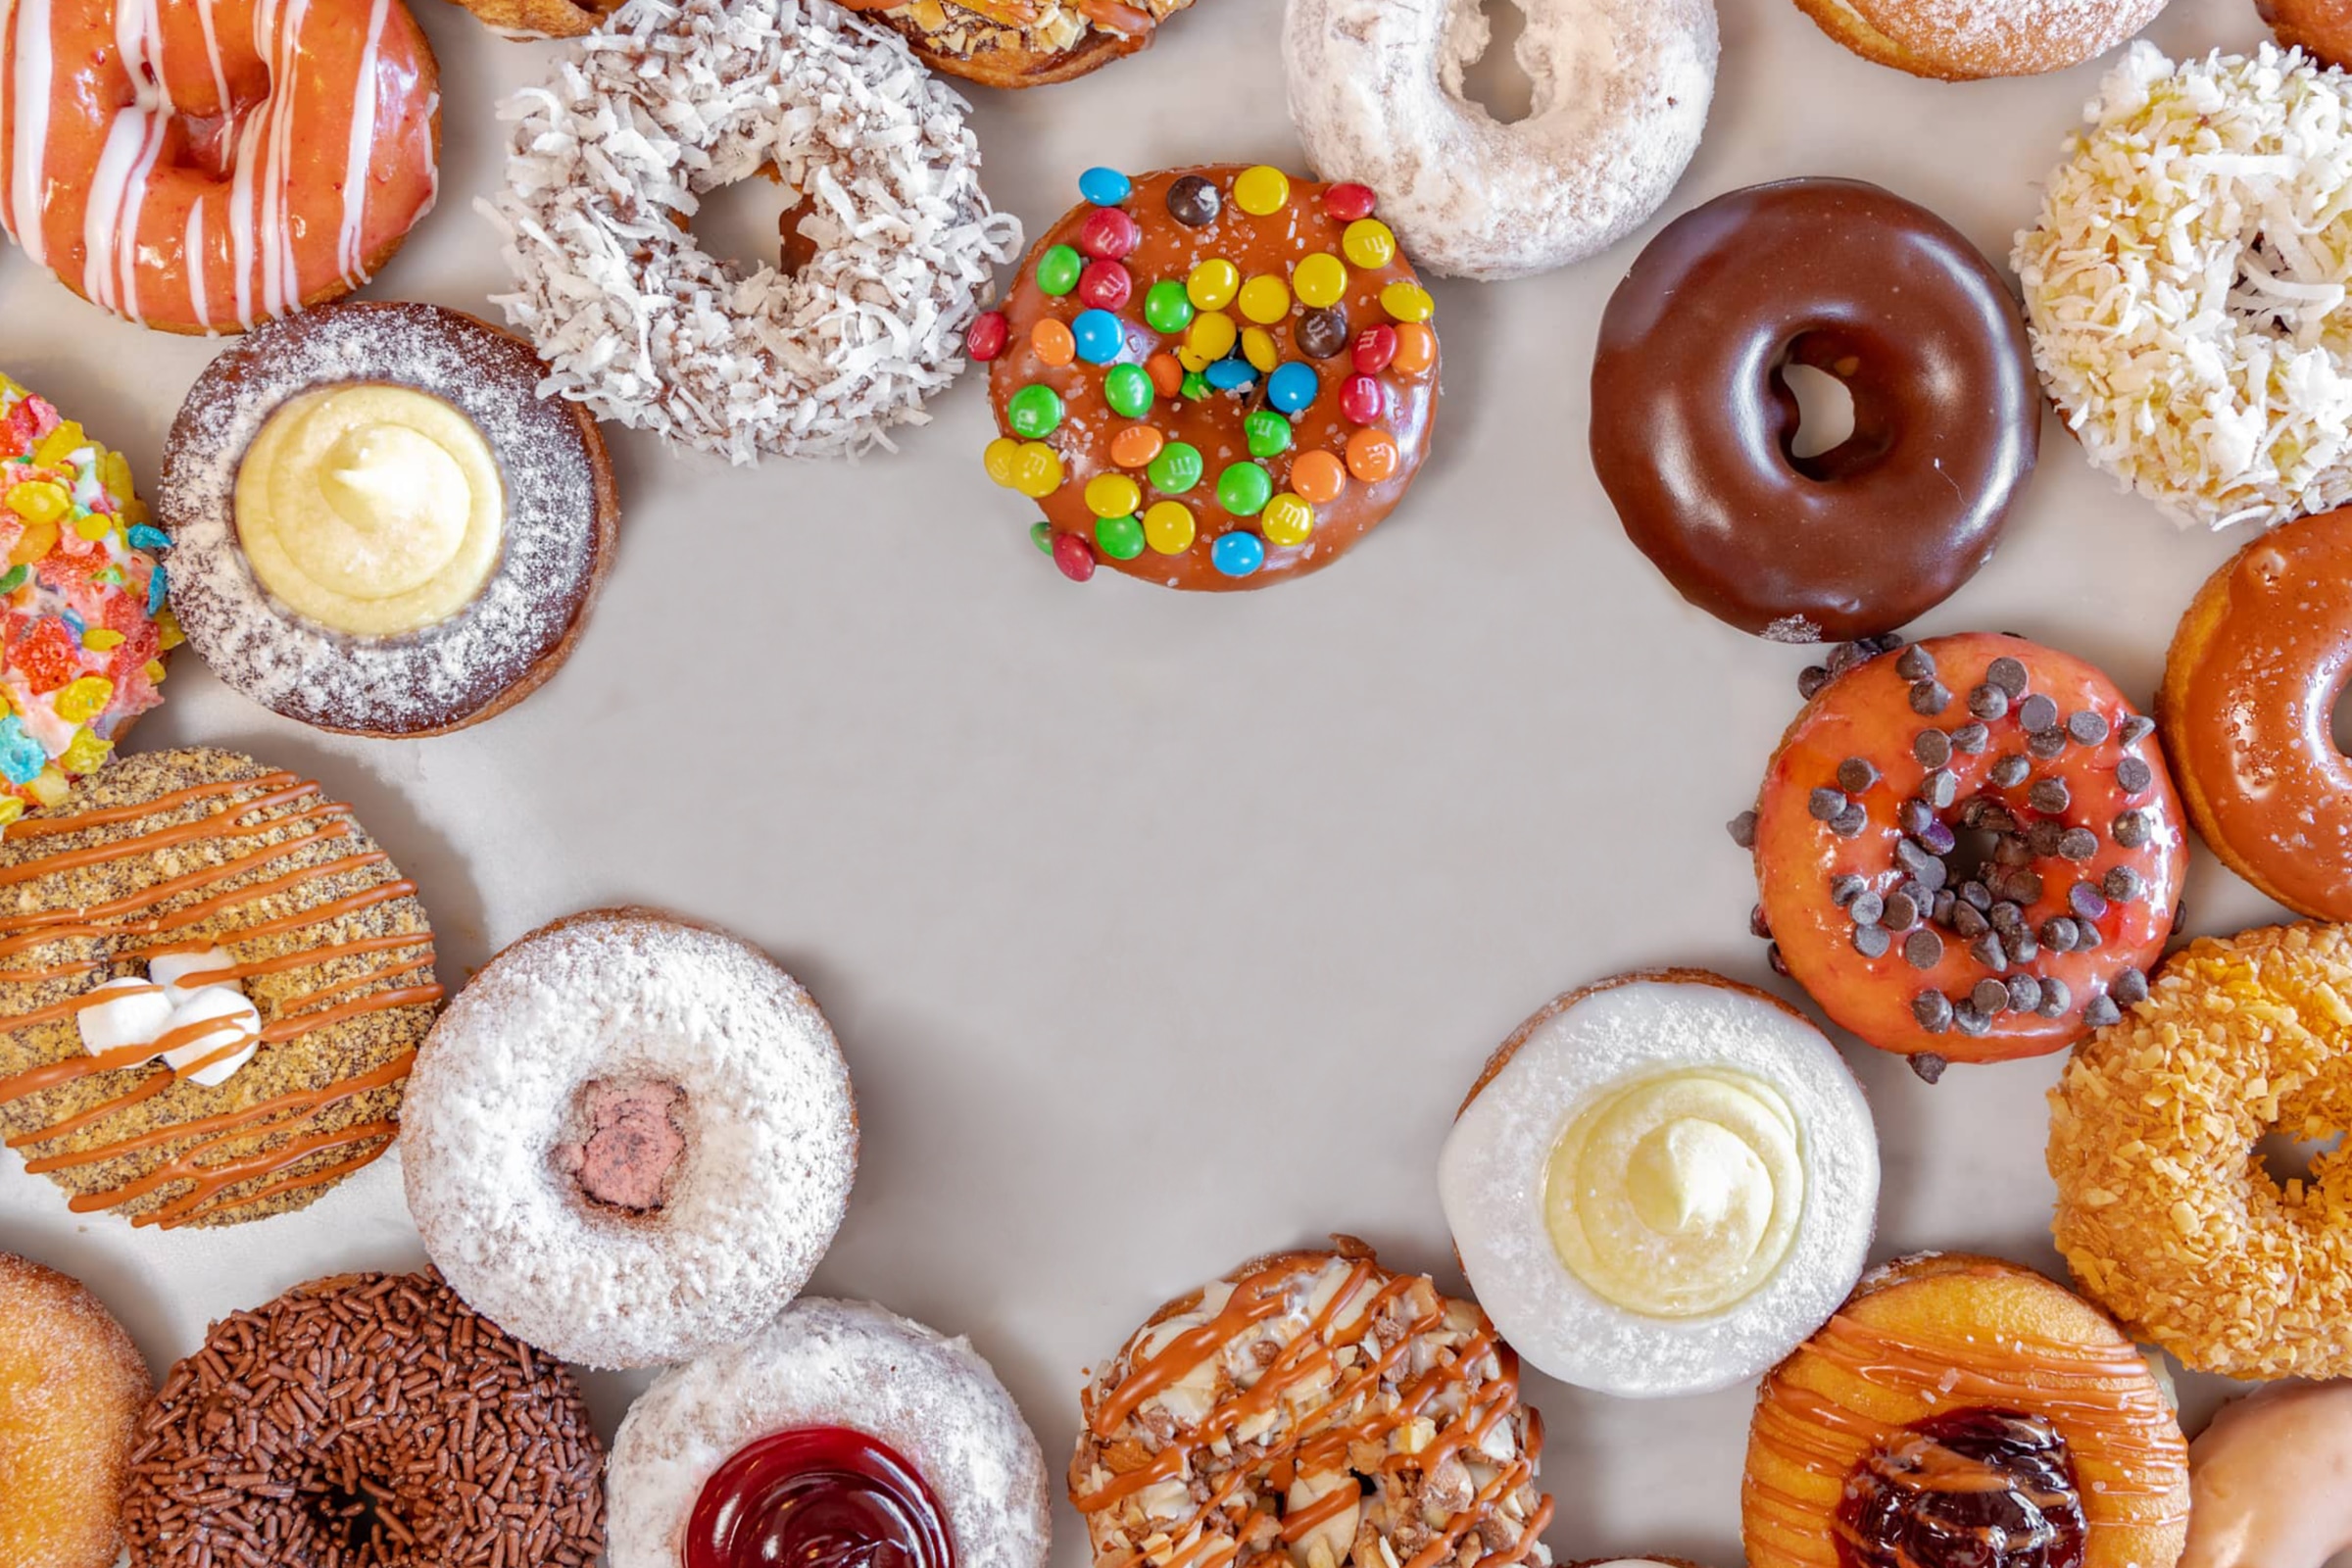 Donuts Arranged In Heart Formation